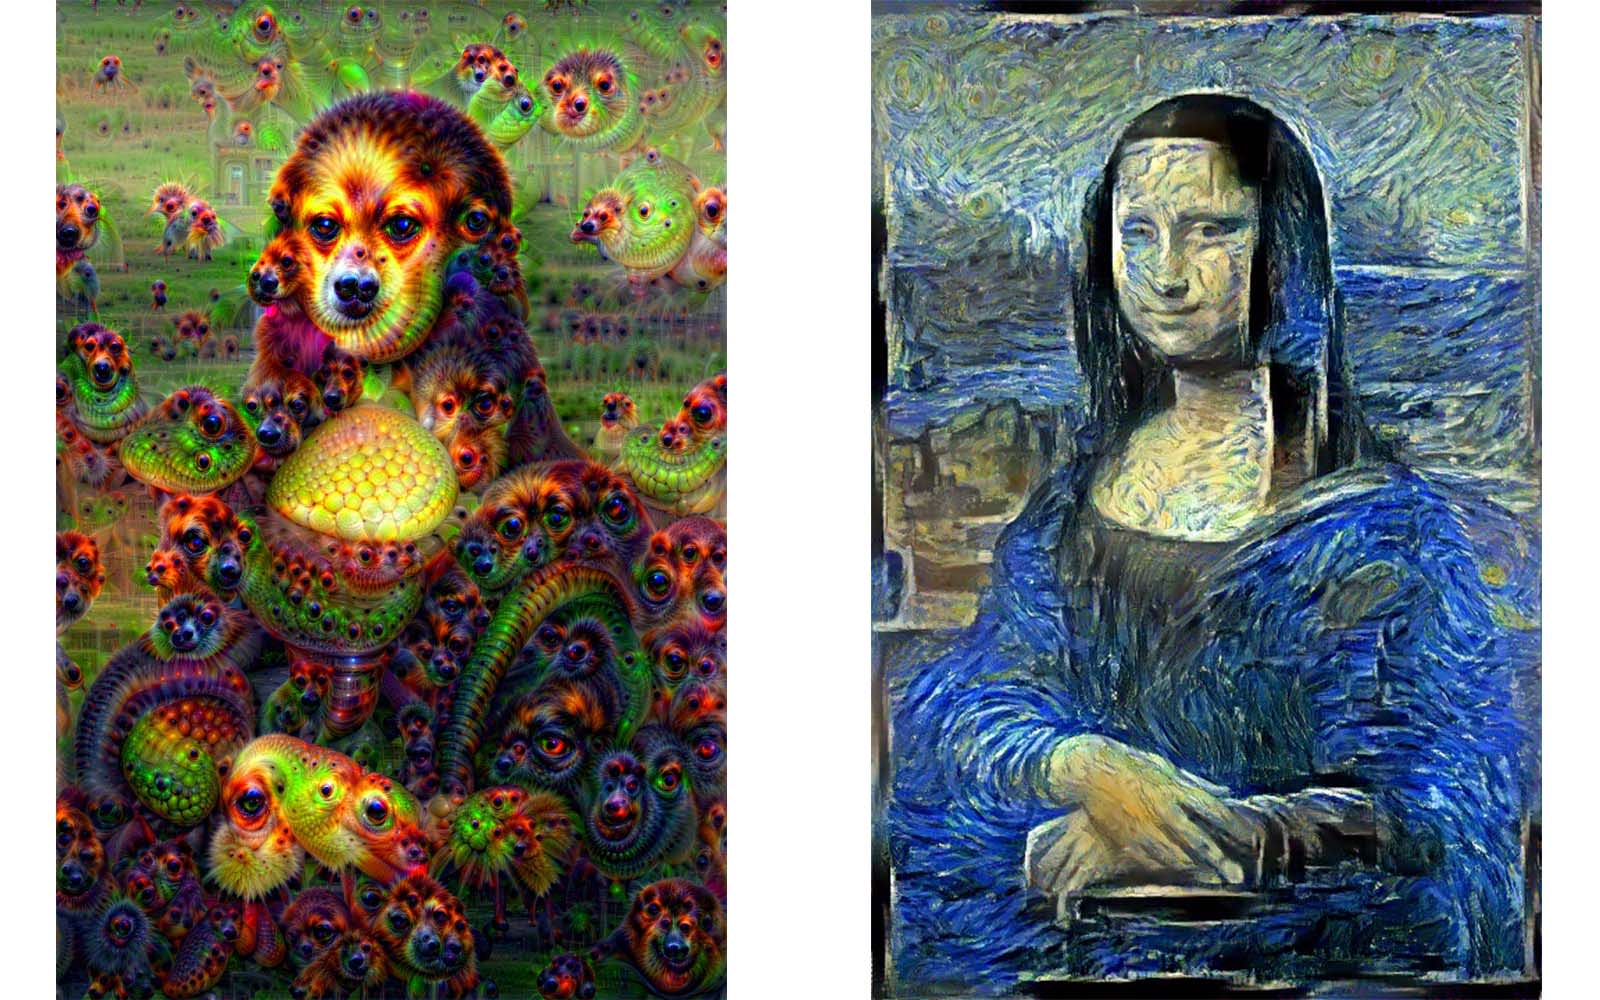 Create Dynamic Artwork from Your Data